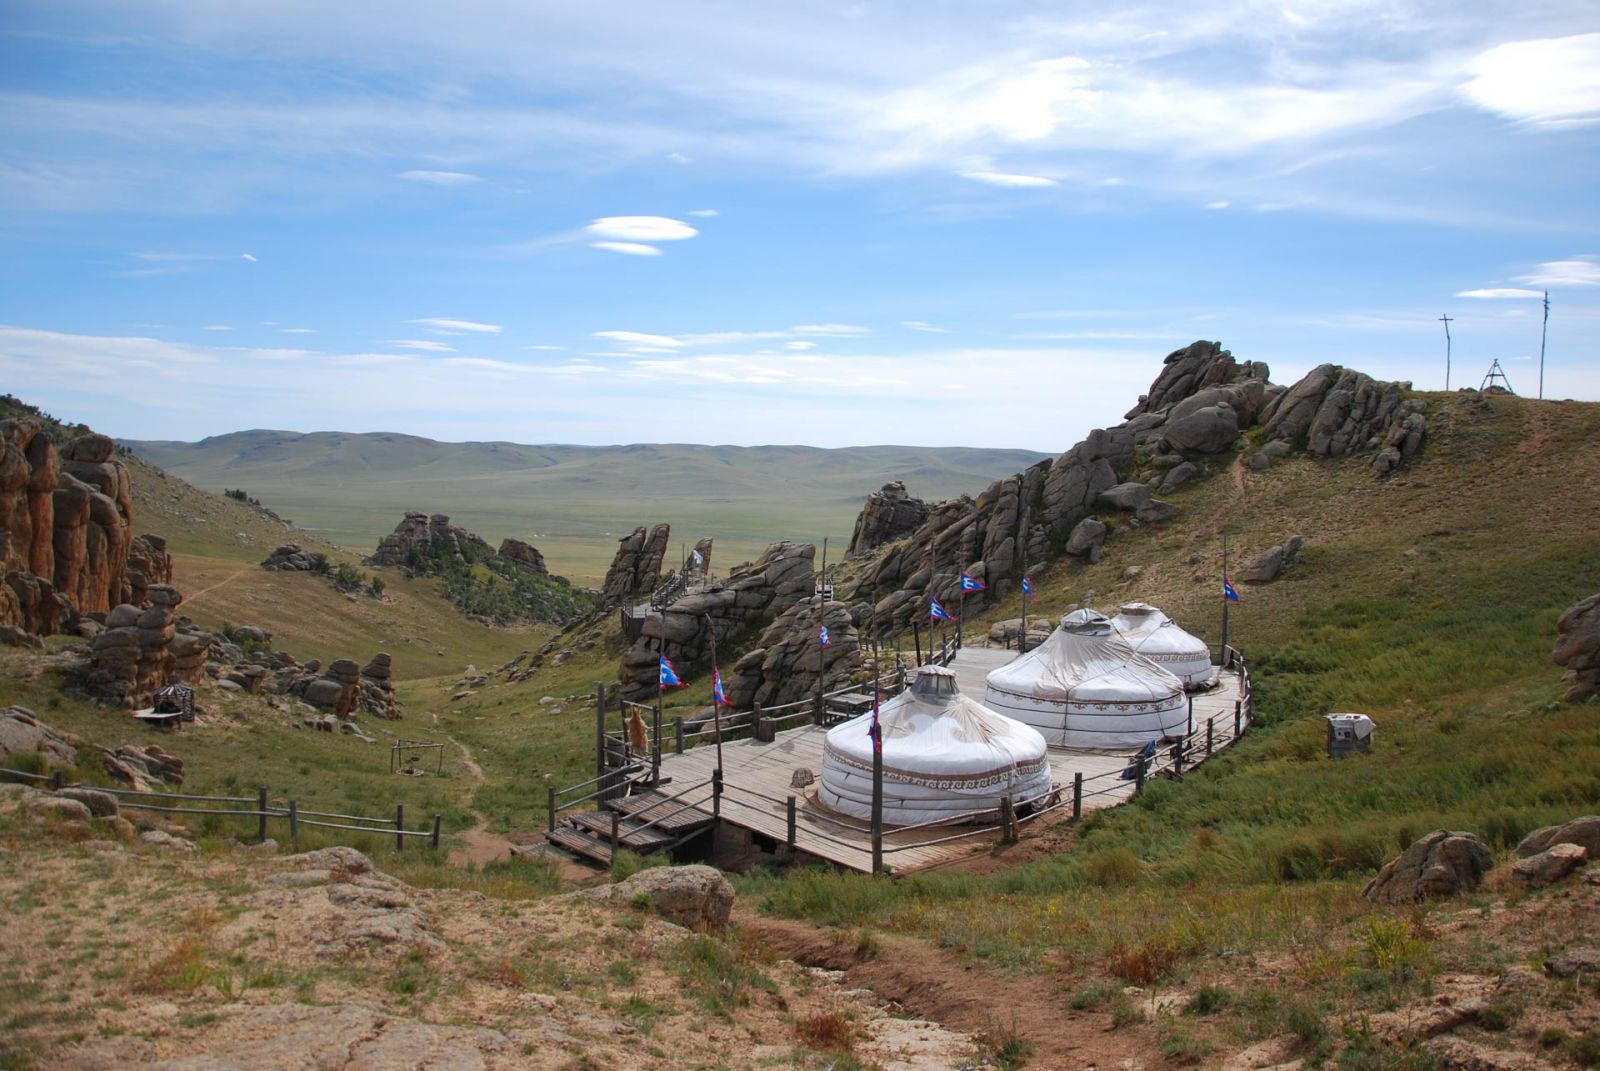 13th century national park in Mongolia